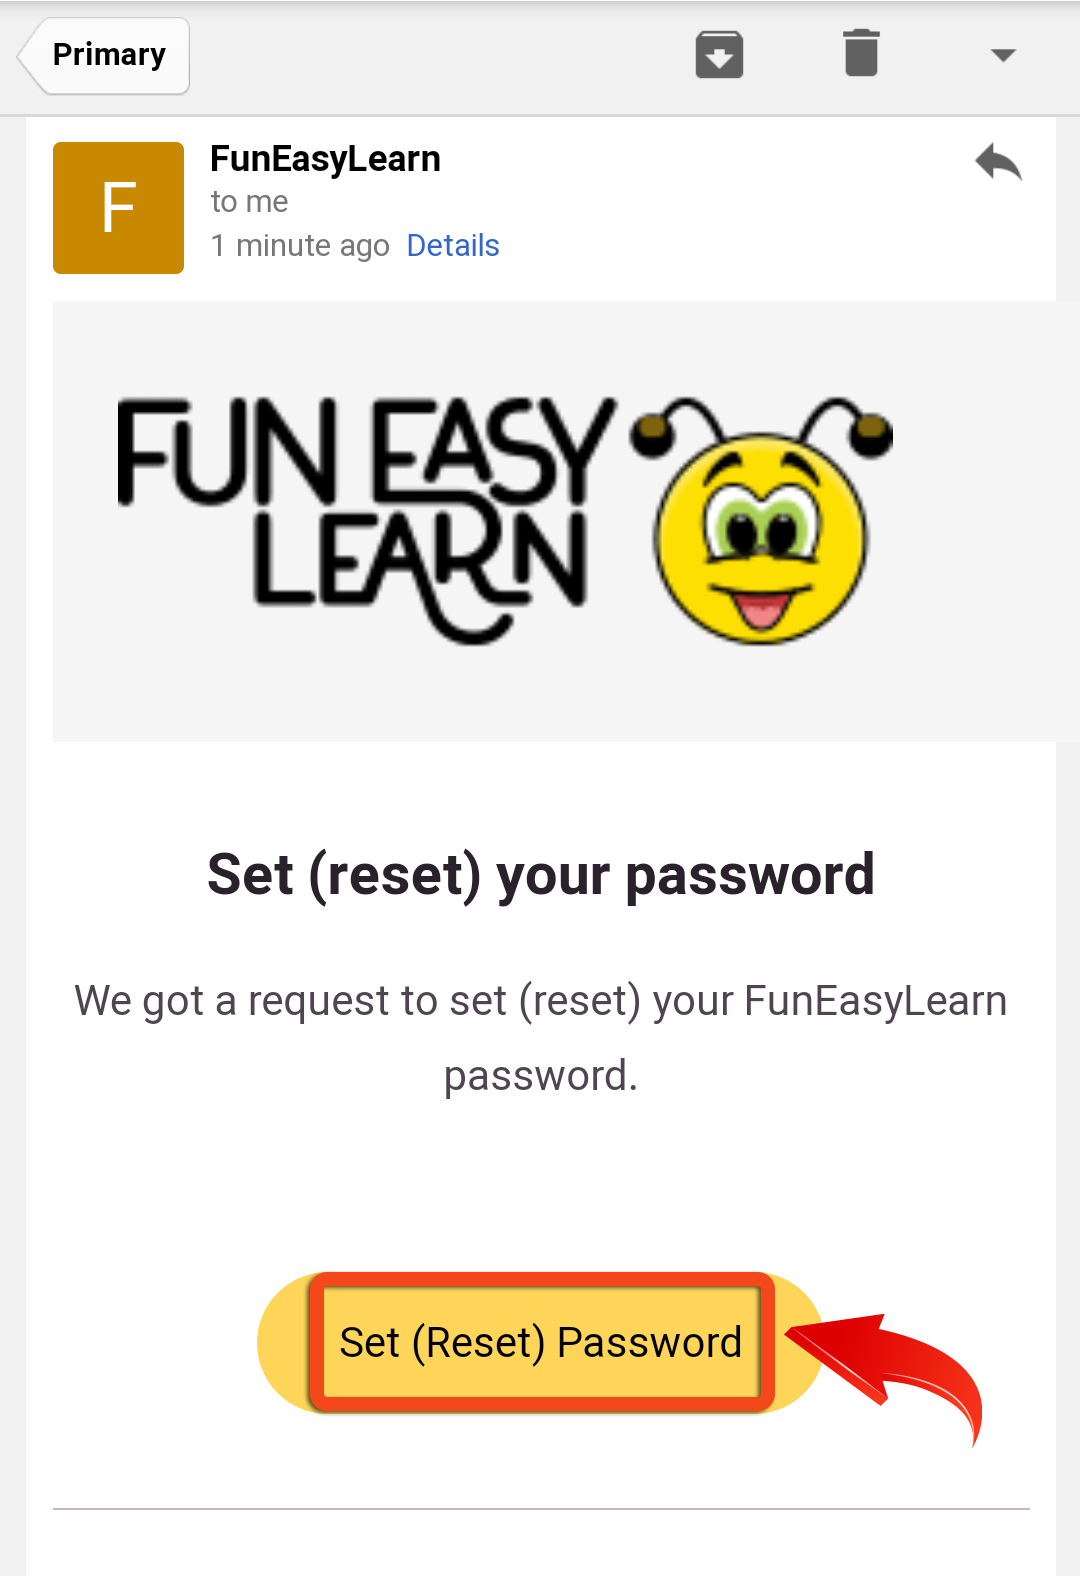 Go_to_your_email__open_the_letter_from_FunEasyLearn_and_set_a_password.jpg